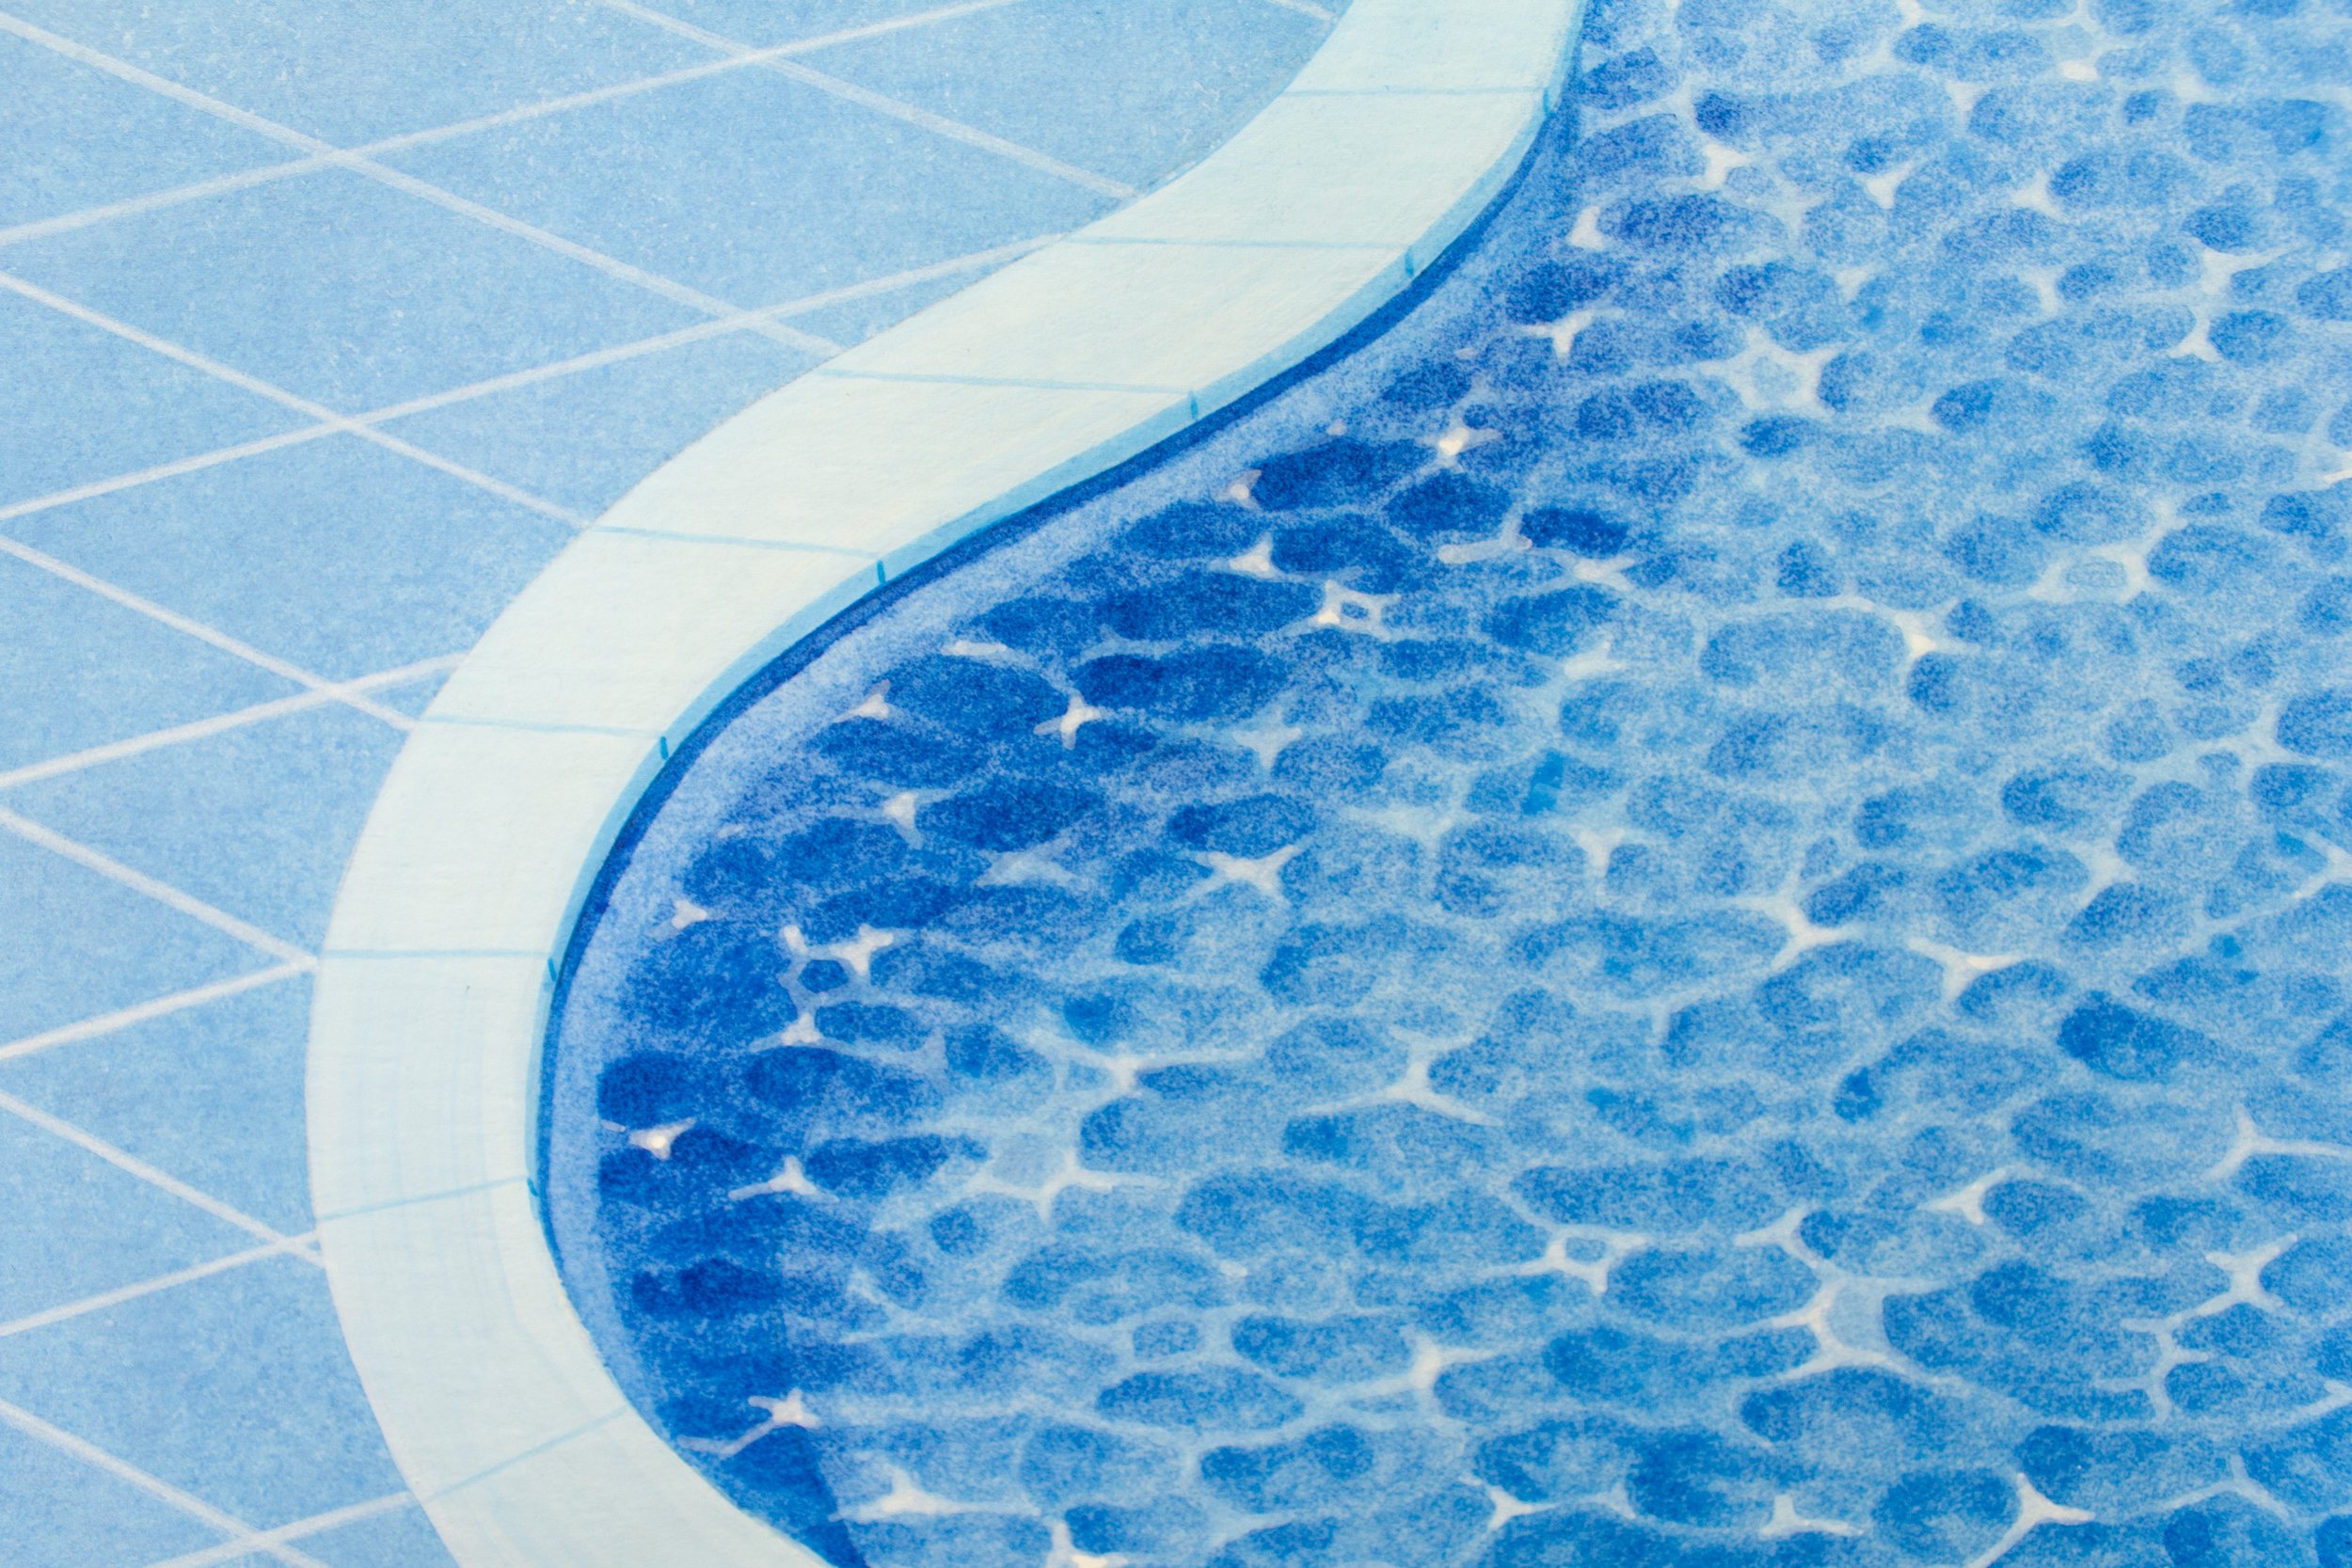 Pool with Slide (detail)